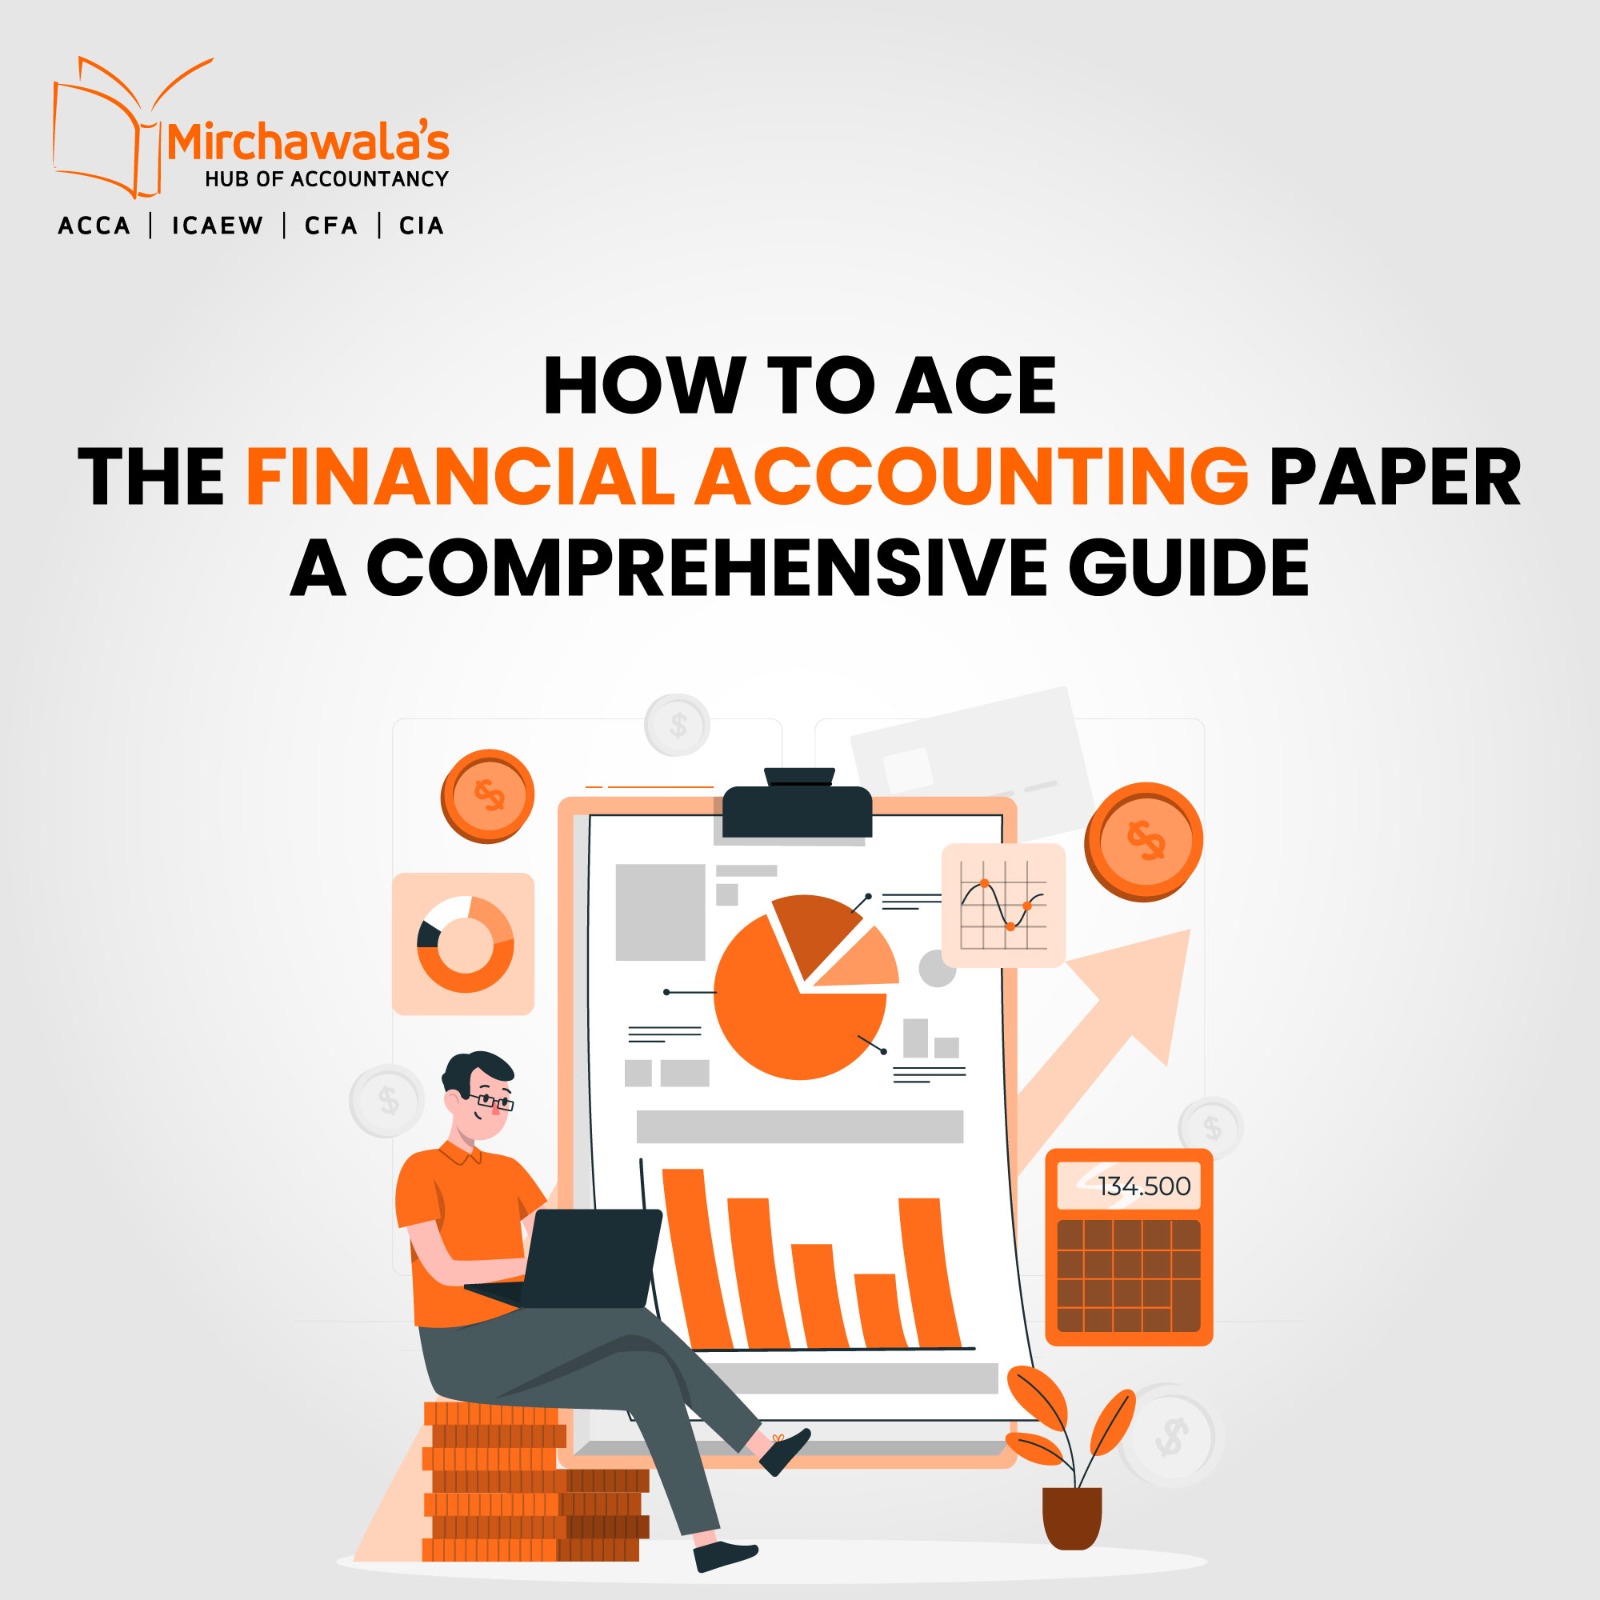 HOW TO ACE THE FINANCIAL ACCOUNTING PAPER: A COMPREHENSIVE GUIDE